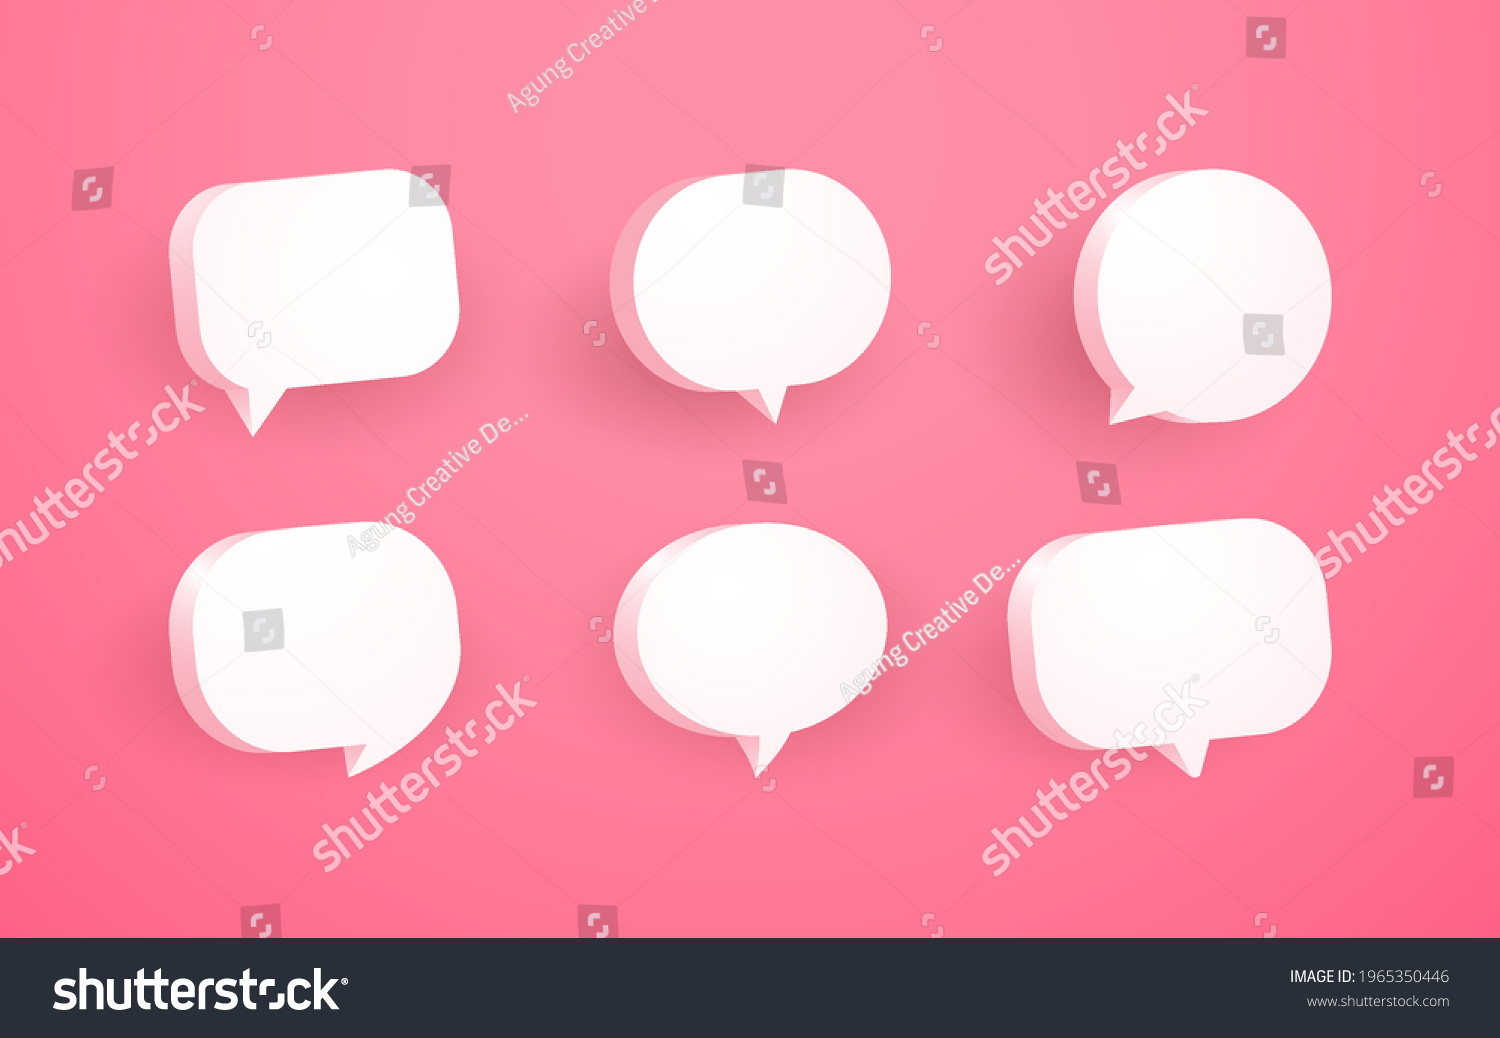 3d pink speech bubble chat icon collection set poster and sticker concept Banner  #1965350446